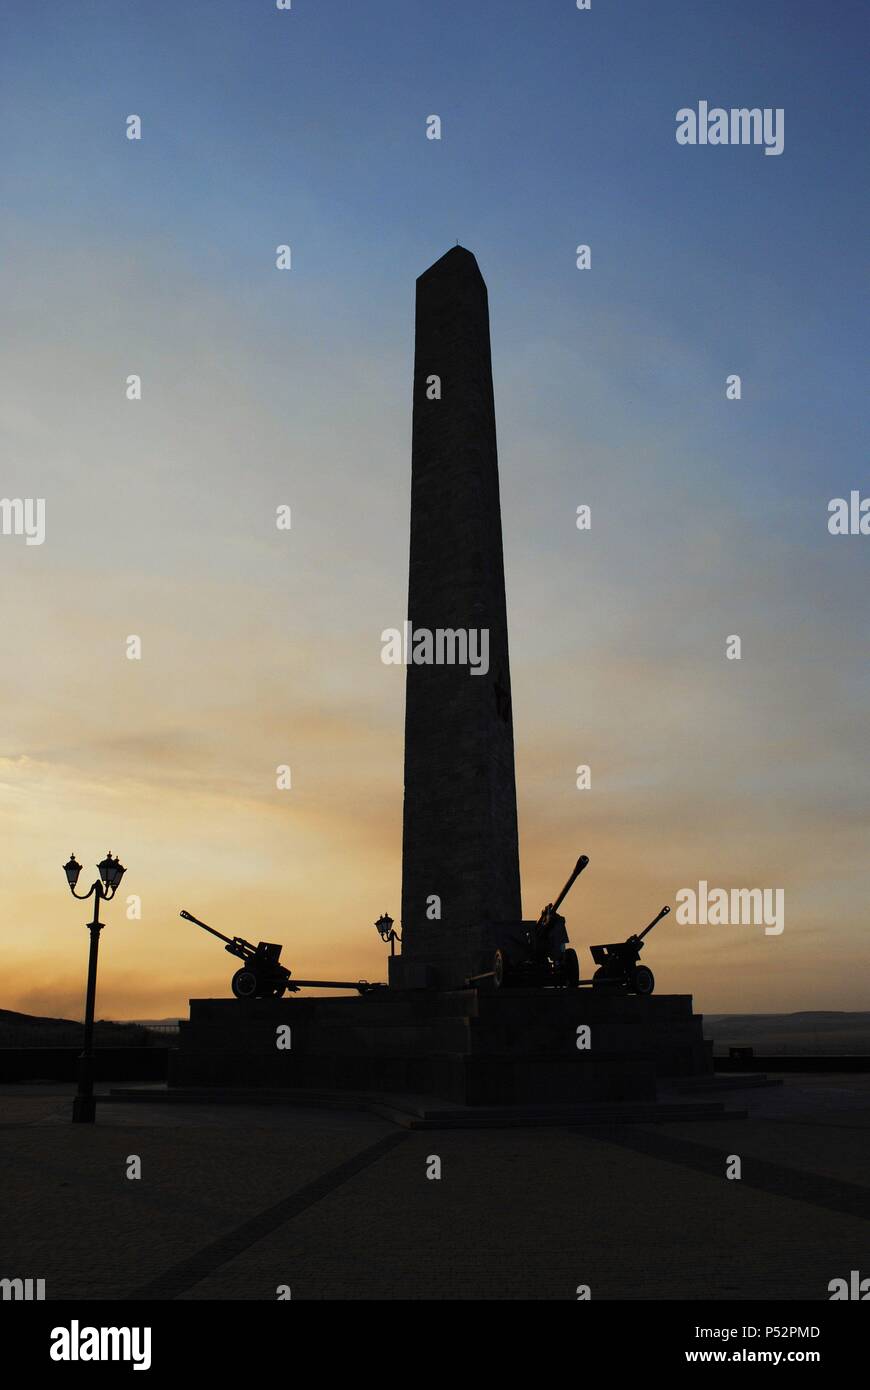 Ukraine. Crimean Peninsula. Kerch. Obelisk of Glory. The memorial on the mountain Mithridat, dedicated to the heroism of Kerch in World War II. Erected in 1944 and designed by Moisei Ginzburg (1892-1946). Mount Mithridates. Stock Photo